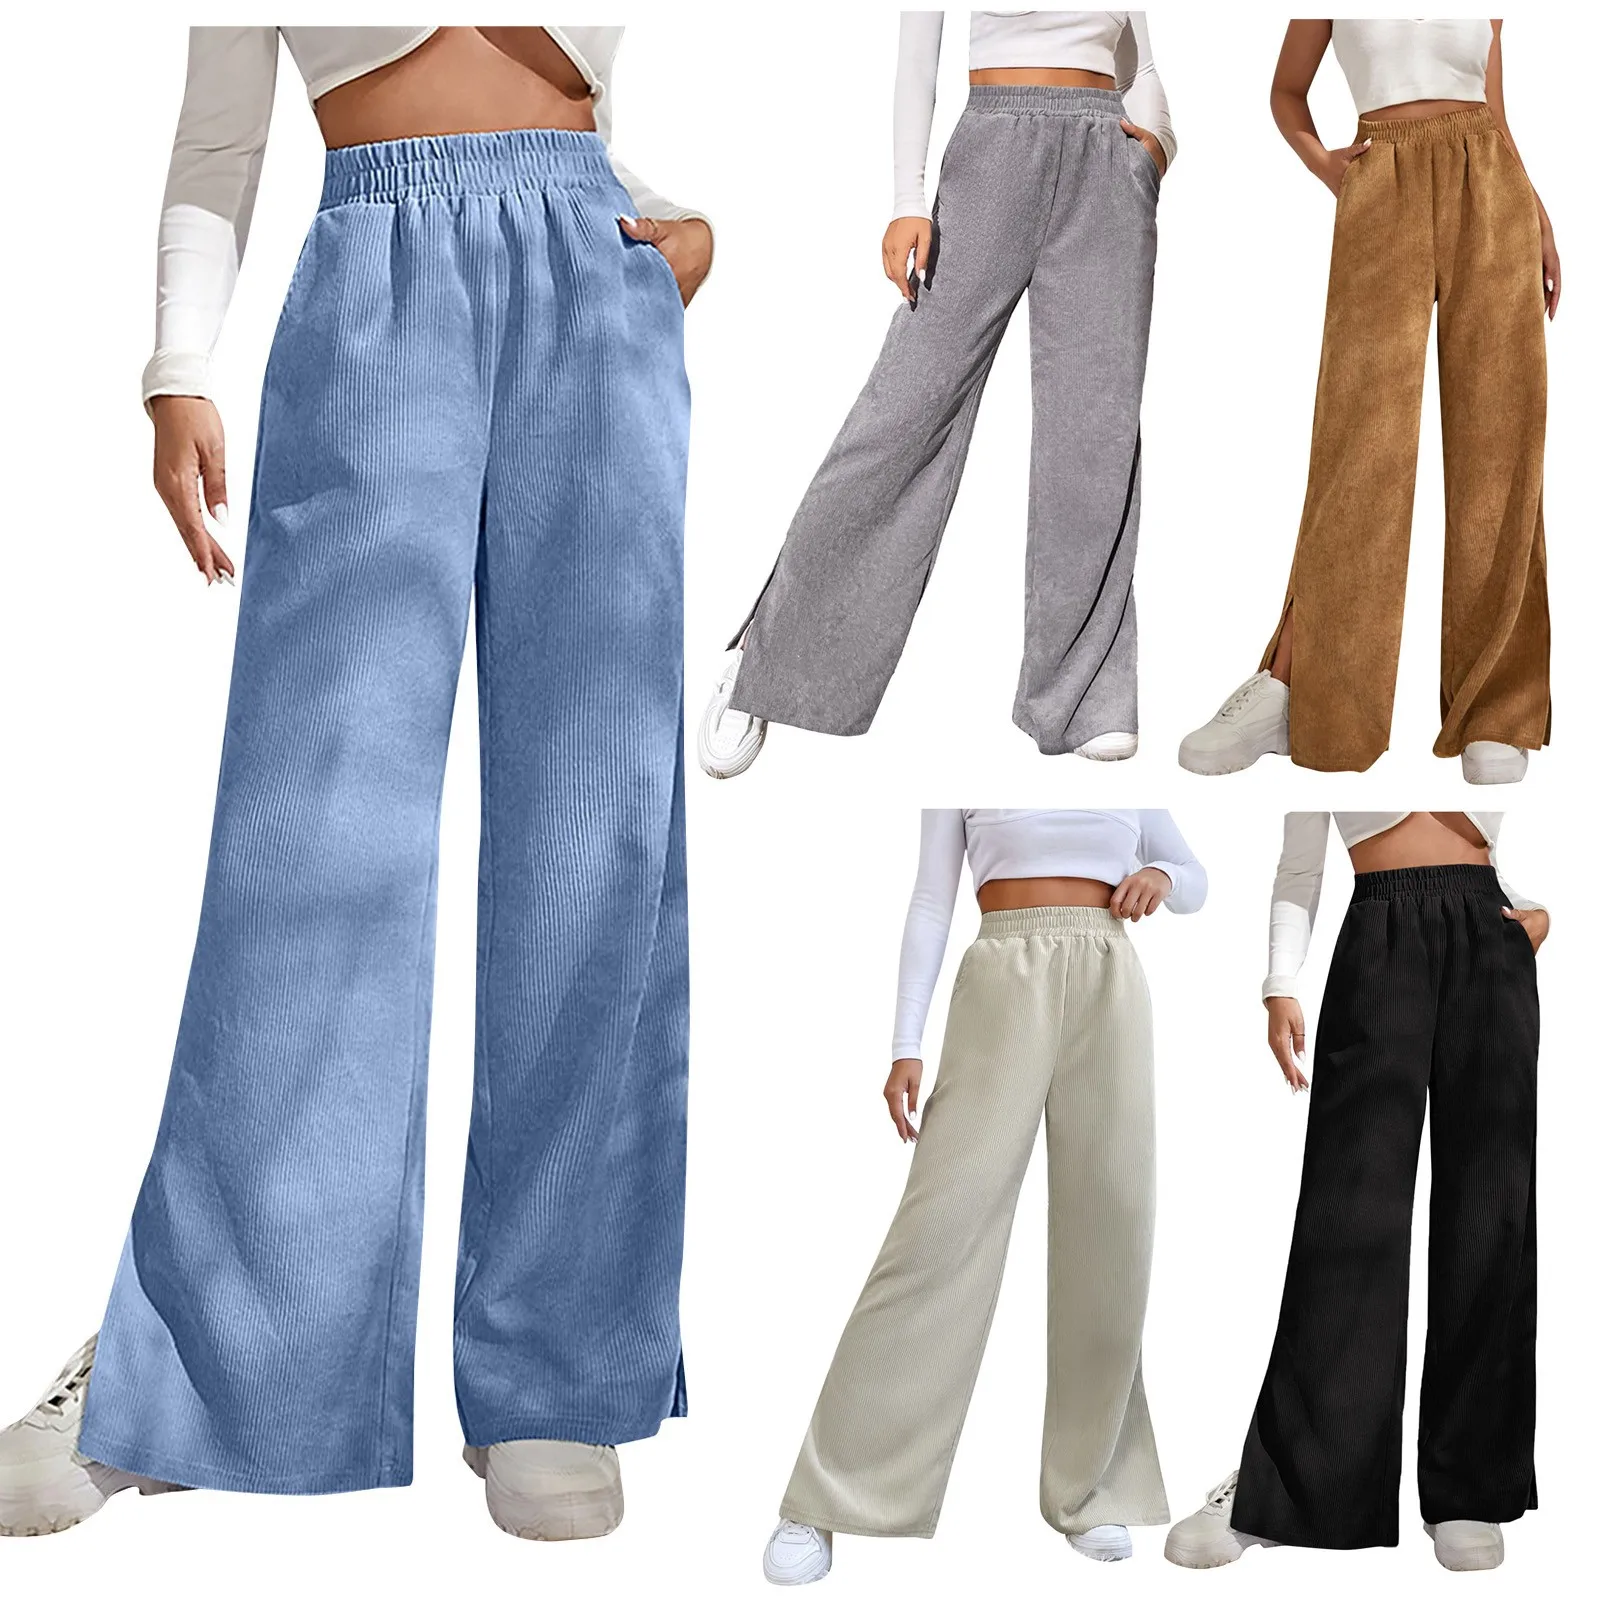 

Women'S High-Waisted Pants With Slits And Hem Solid Color Spliced Casual Pants Coats Woman Winter 2022 Roupas Femininas New